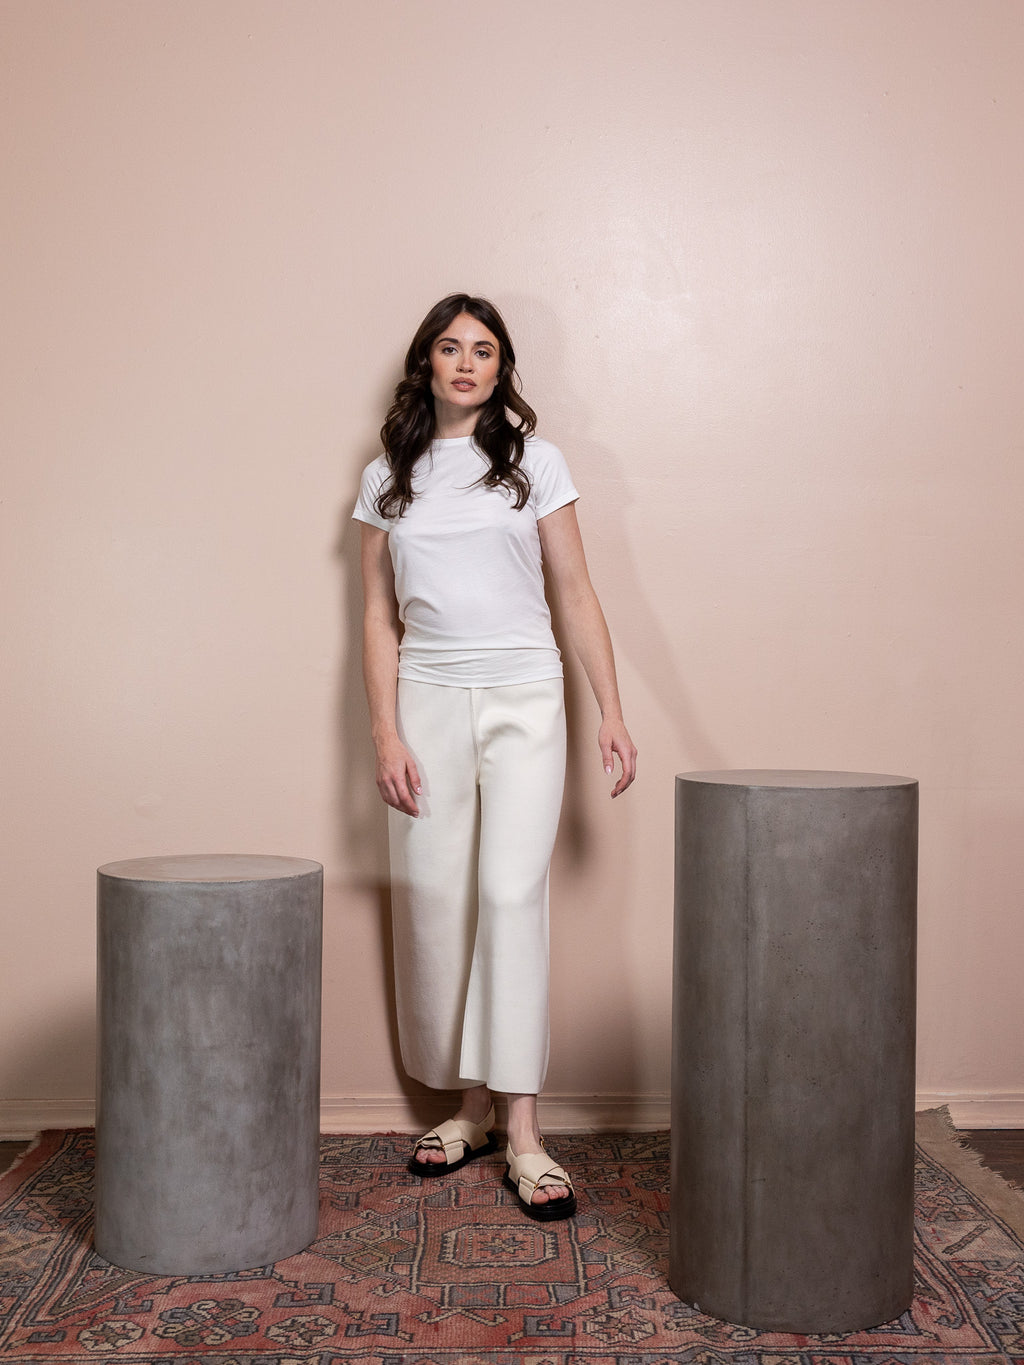 Woman in white top and white pants against pink background